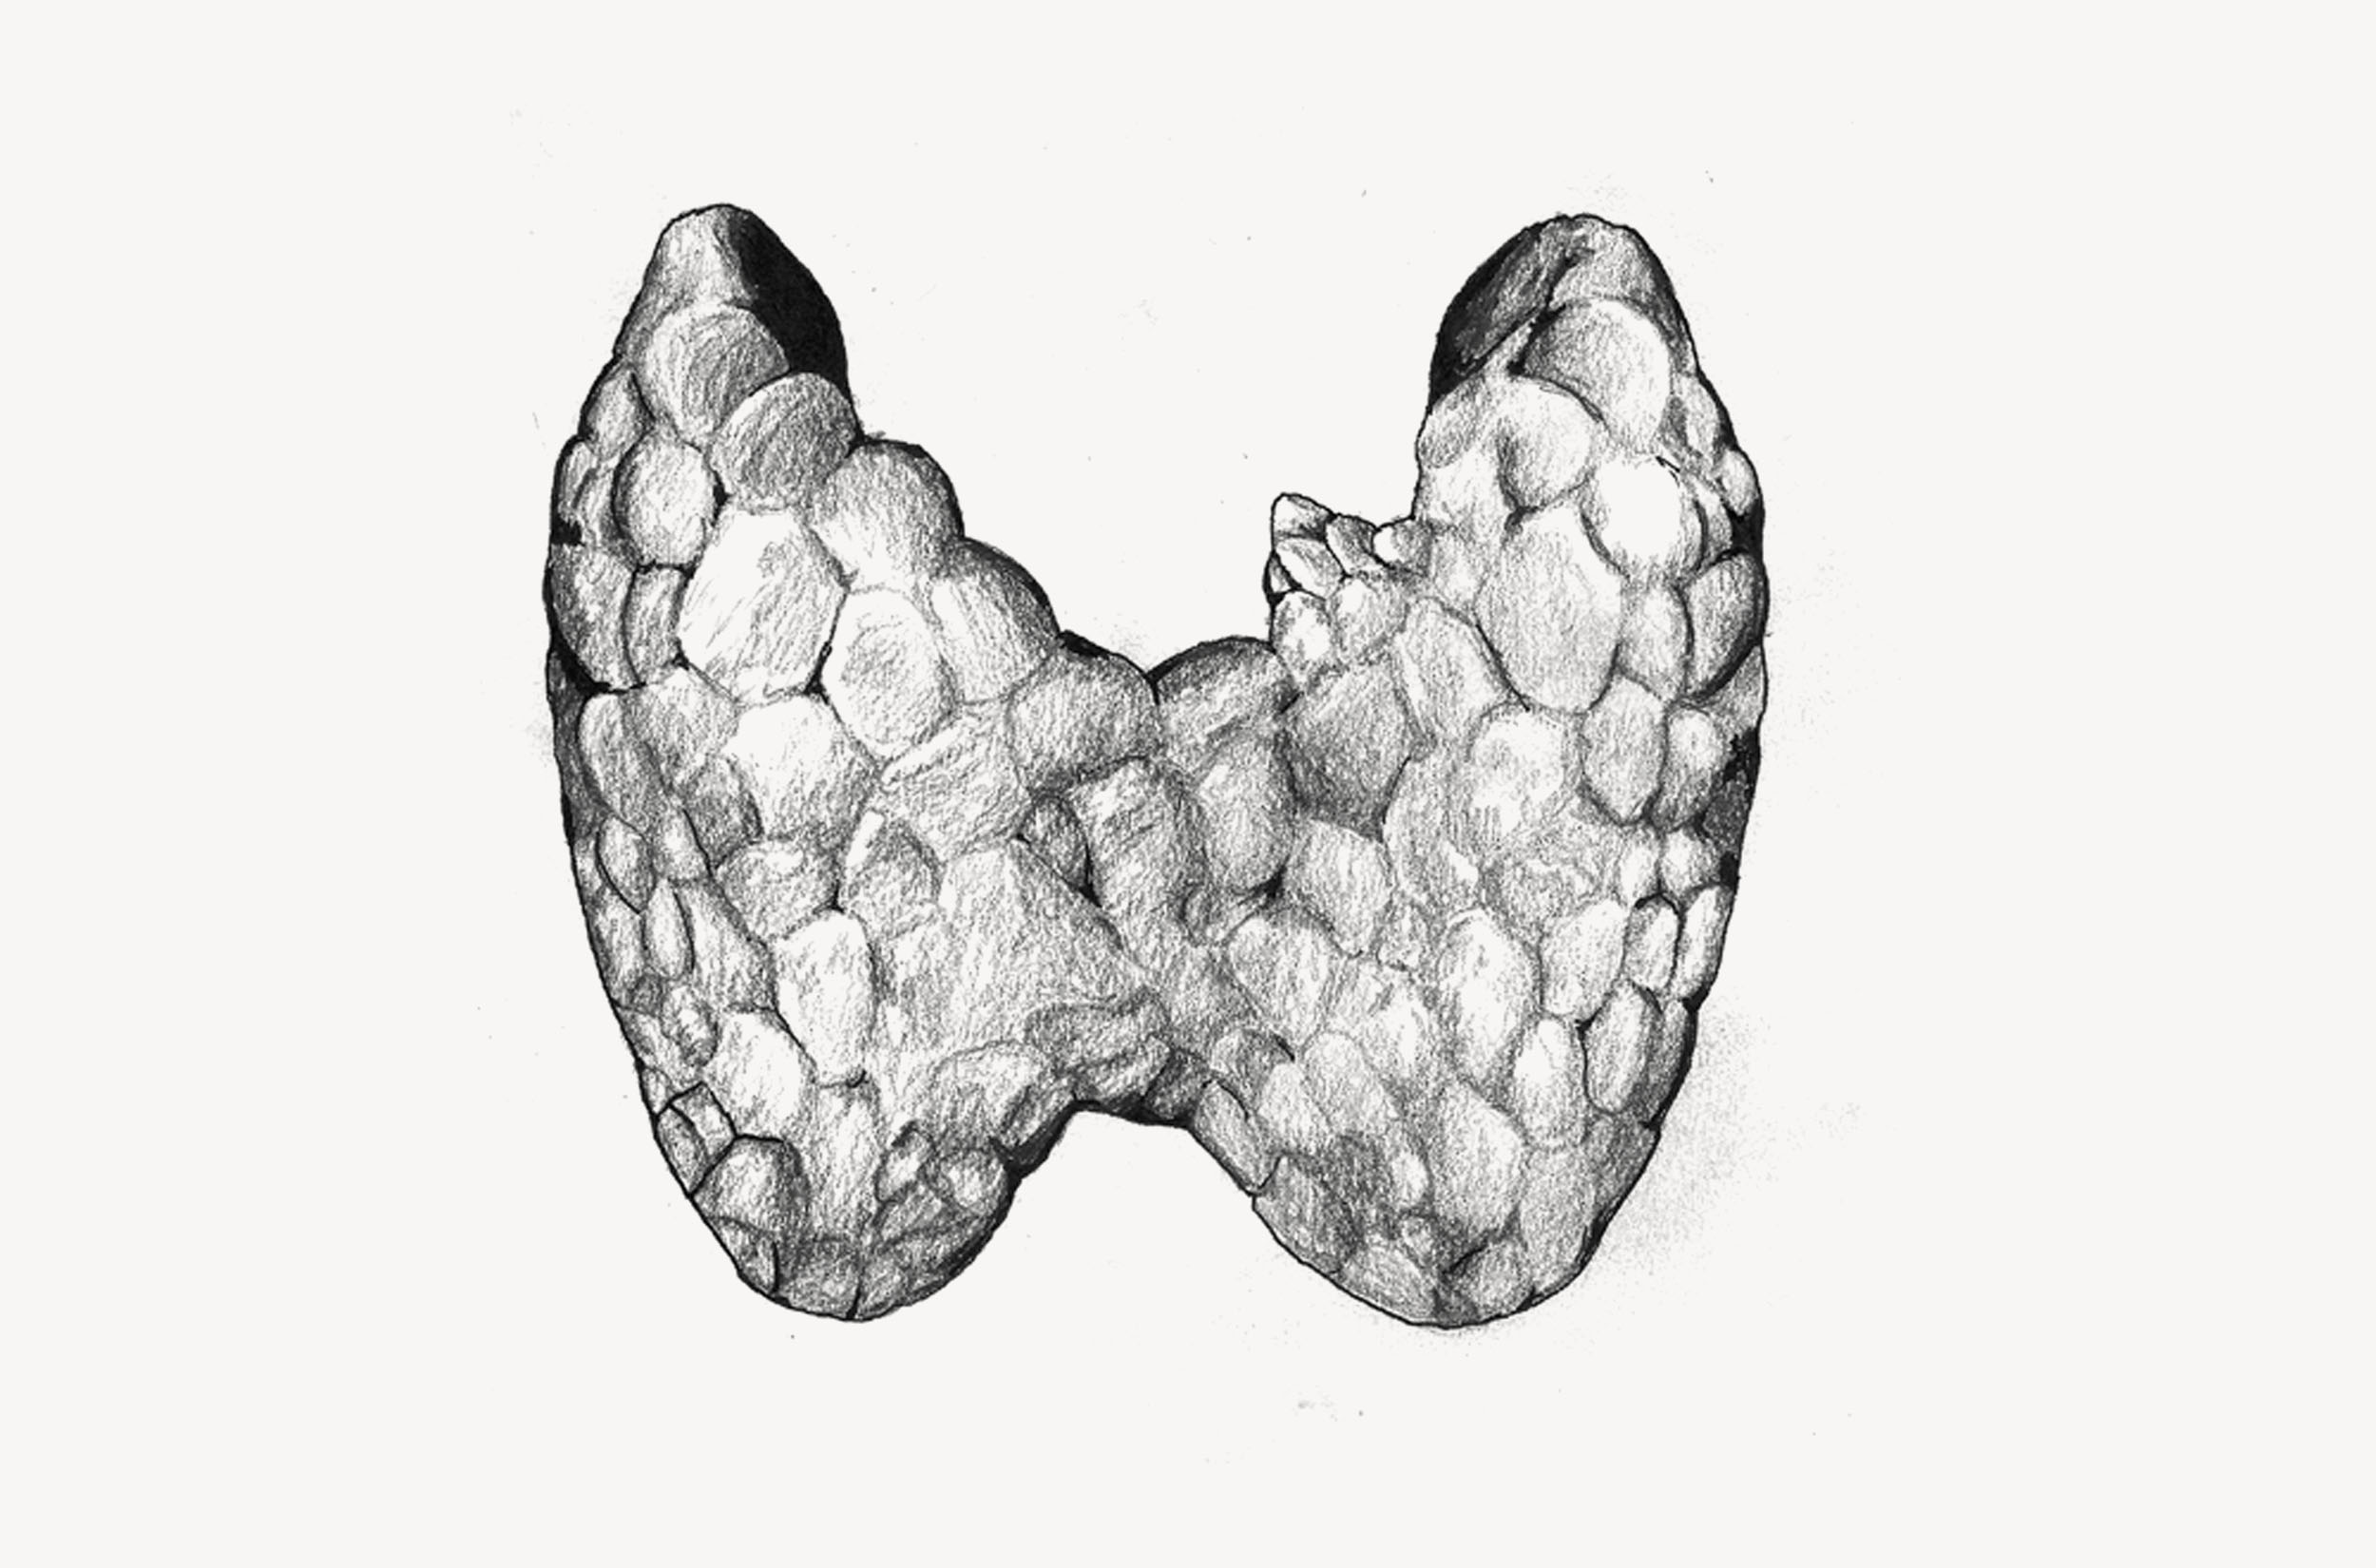 A pencil drawing of human lungs.